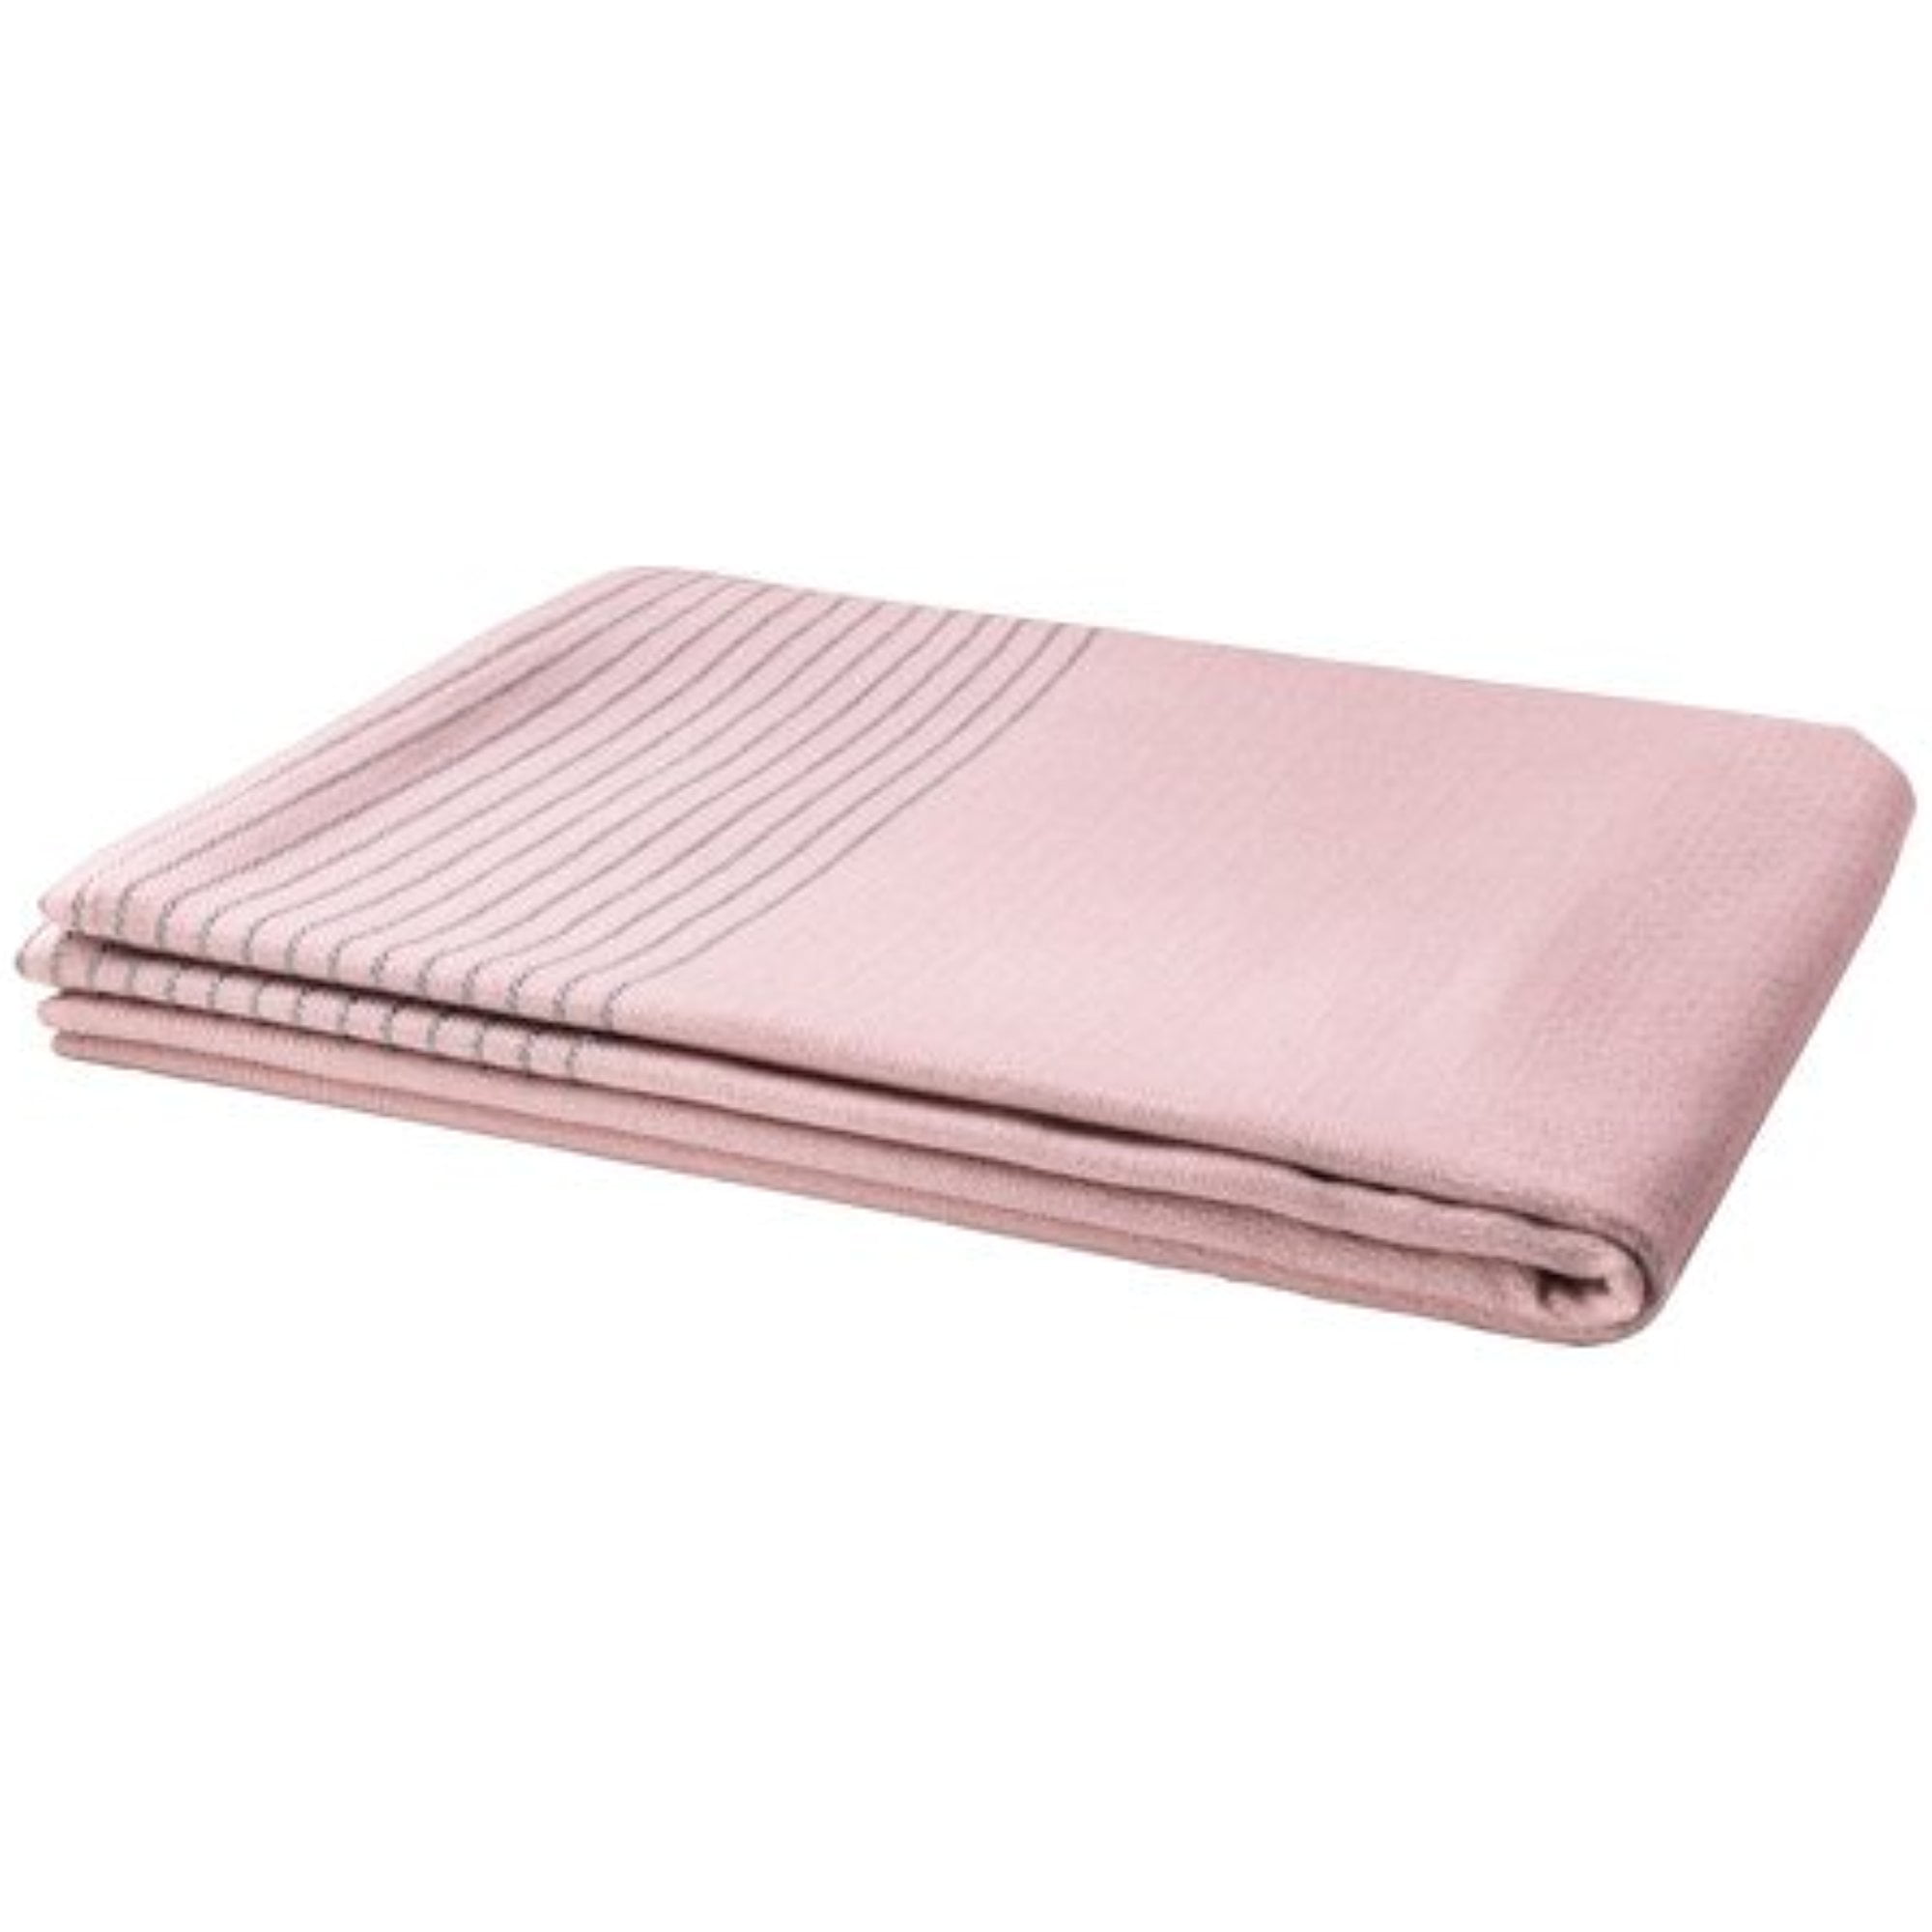 Ikea Tablecloth Pink 628 82323 238, Ikea Round Tablecloth